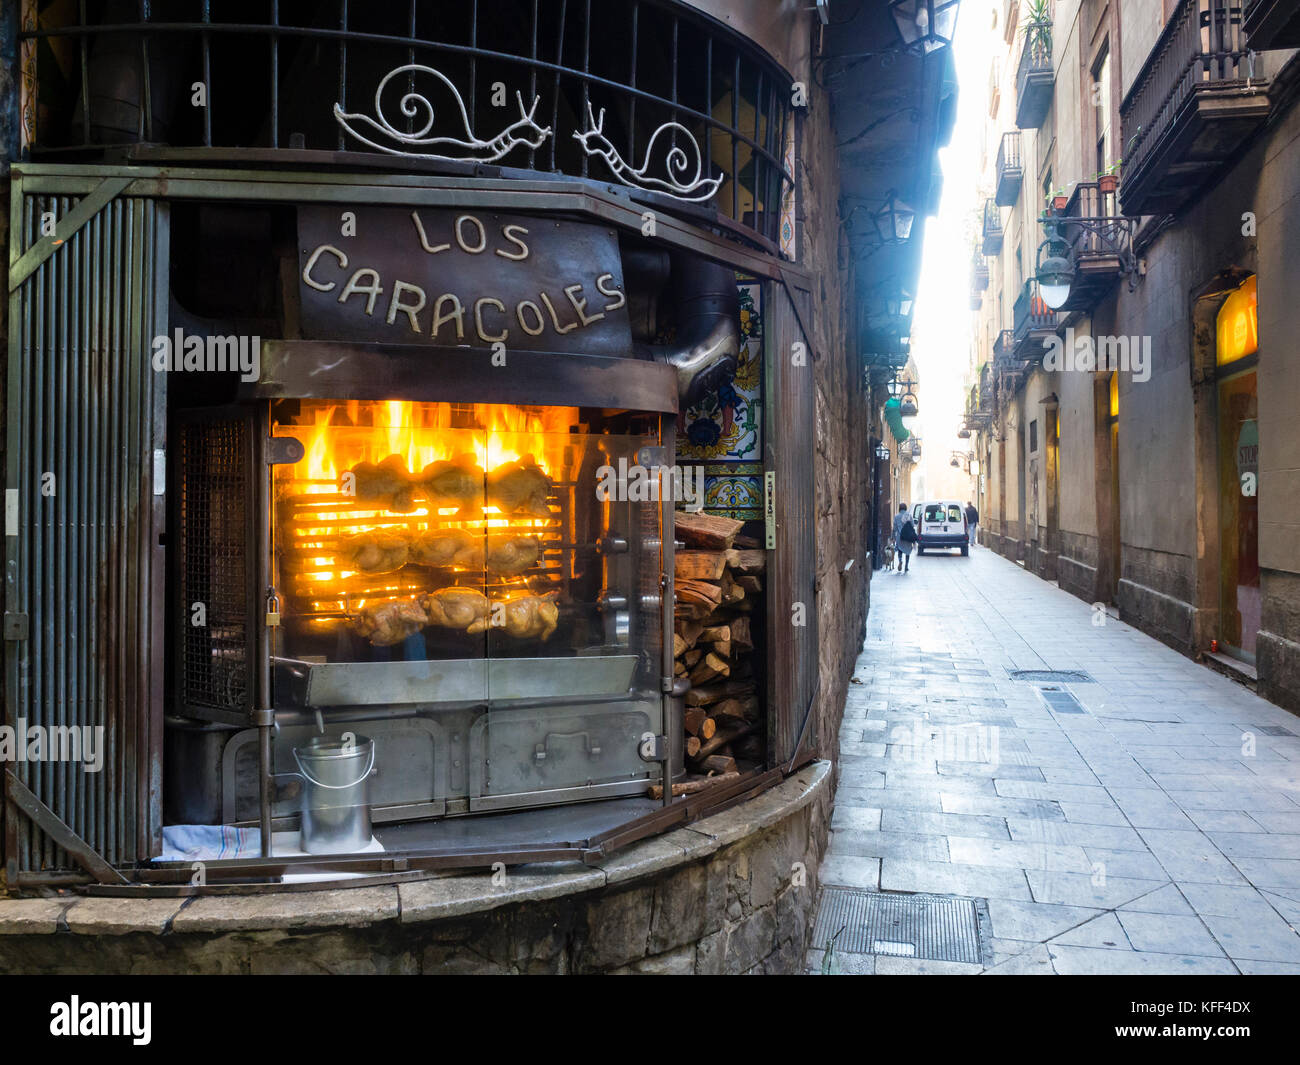 Barcelona, Spain - 11 Nov 2016: Chicken on a spit are rotating on the rotisserie grill of Barcelona's famous restaurant 'Los Caracoles'. Stock Photo